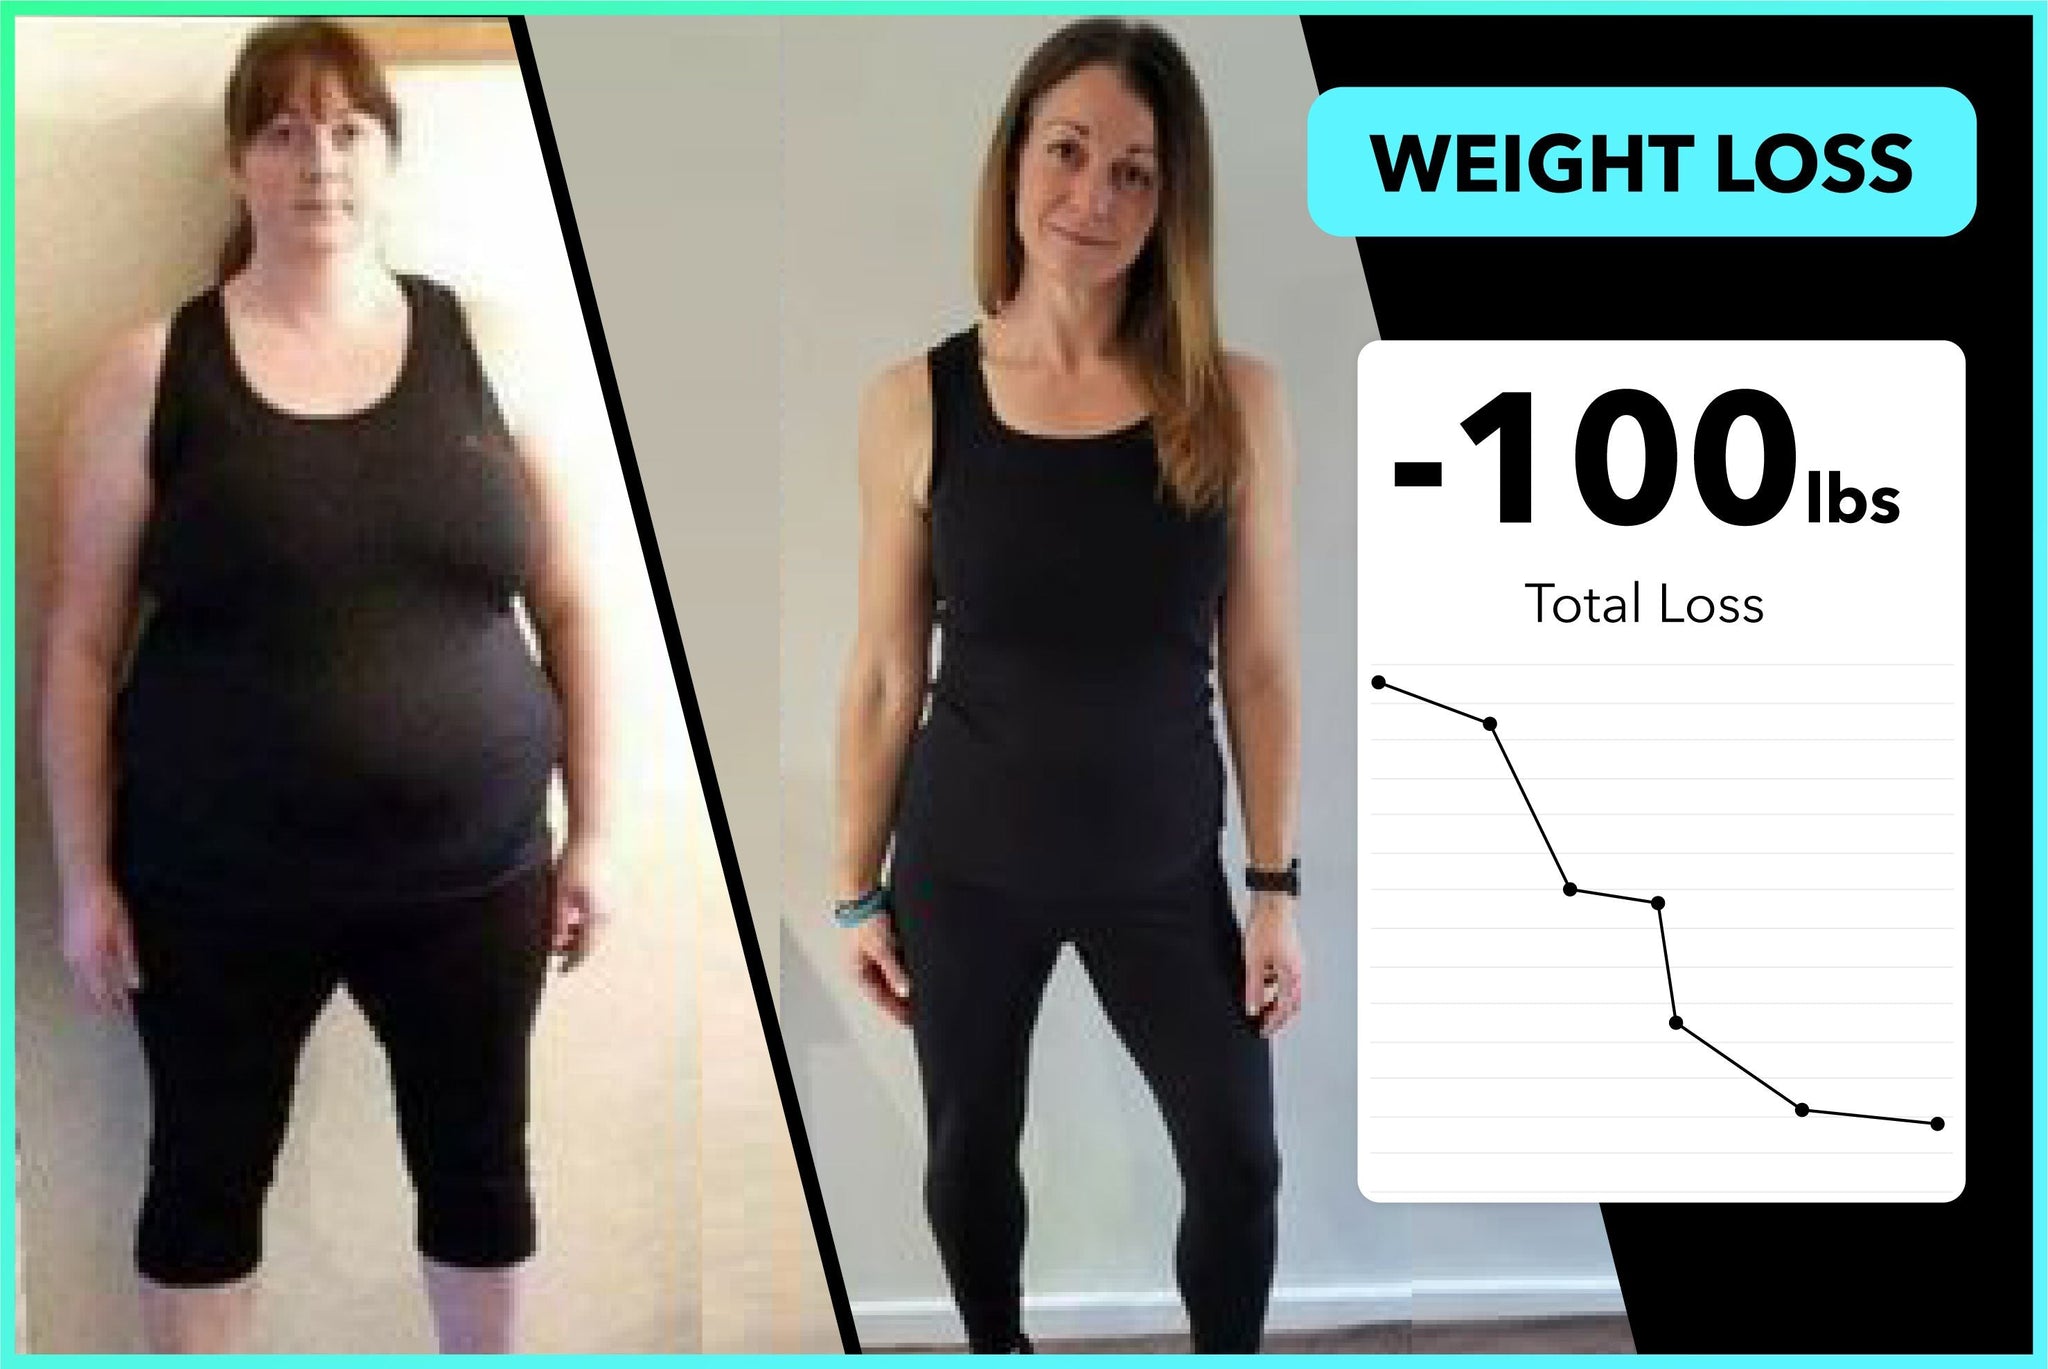 Michele lost over 100lbs with Team RH